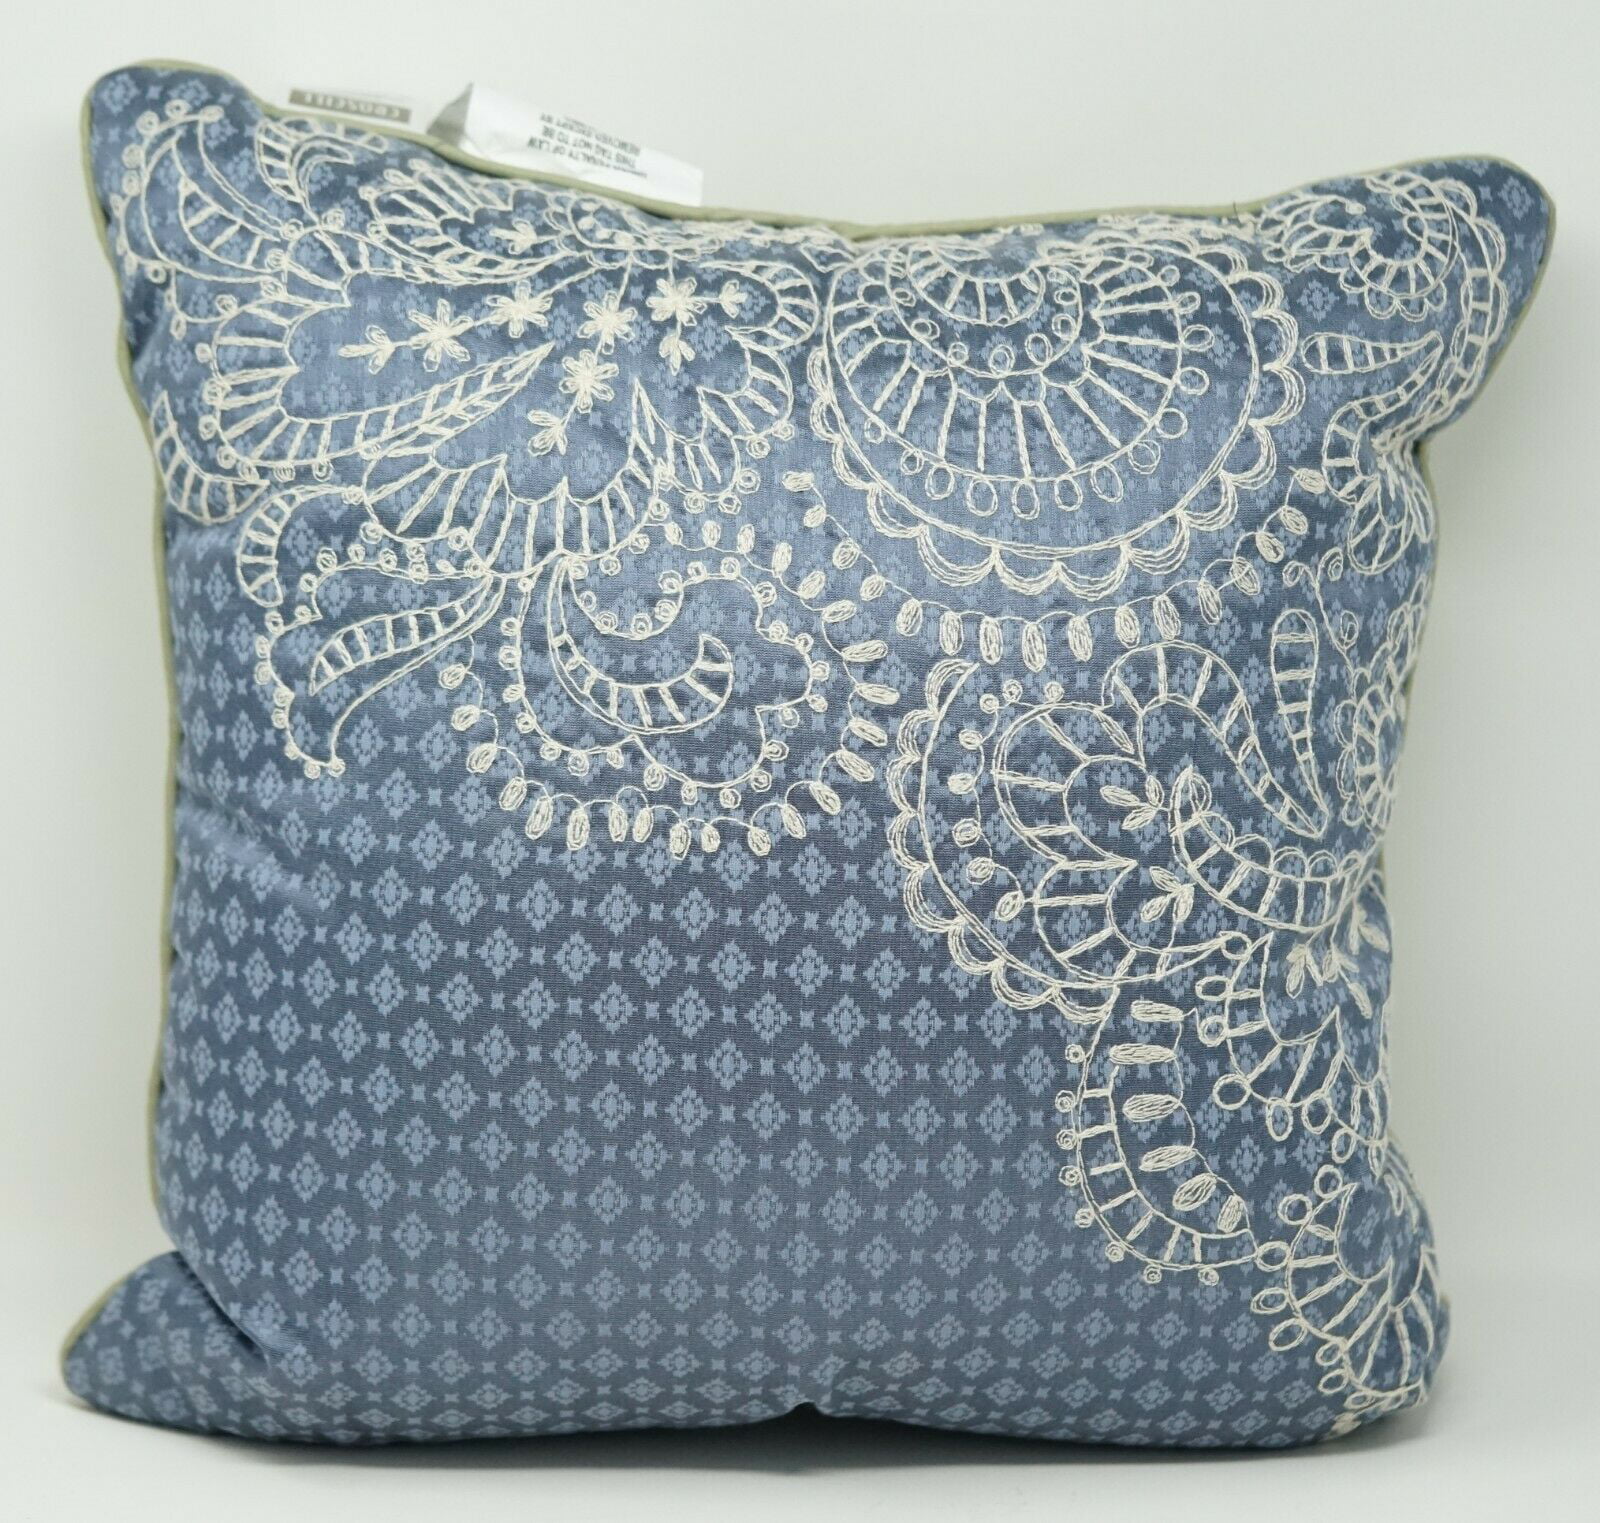 Hand Block Print Cushion Cover Bed Indian Pillow Covers Linen || Australia Indigo Midnight Blue Decorative Throw Pillows For couch